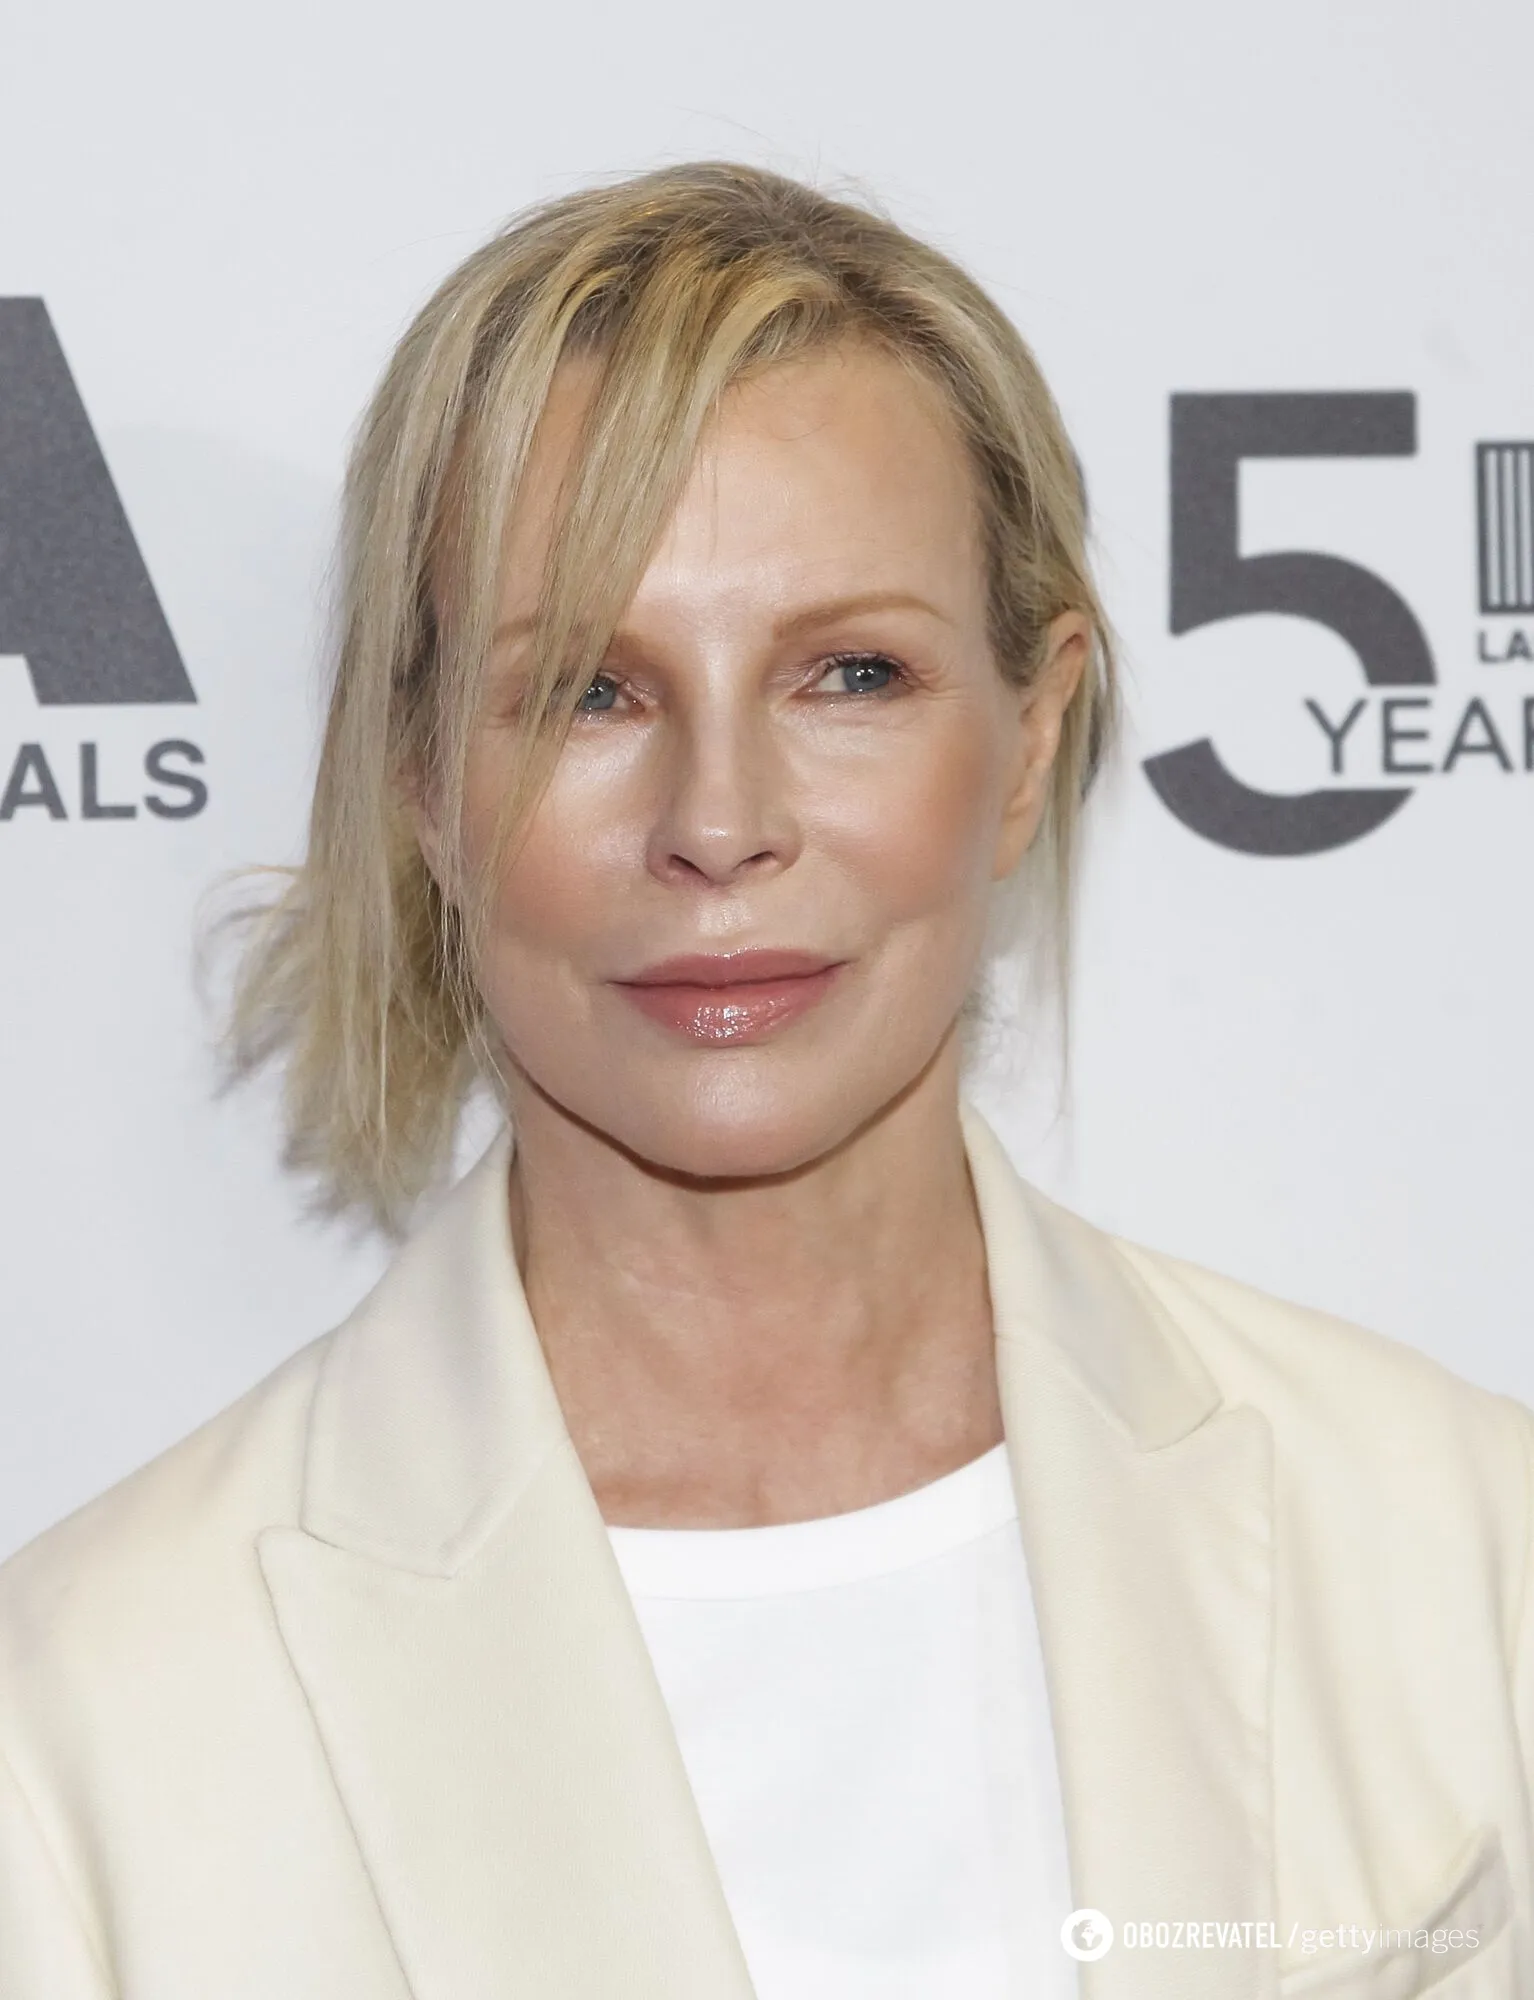 An ''Oscar'' for playing a prostitute and plastic surgery that disfigured the Playboy star: interesting facts about Kim Basinger, who celebrates her 70th birthday